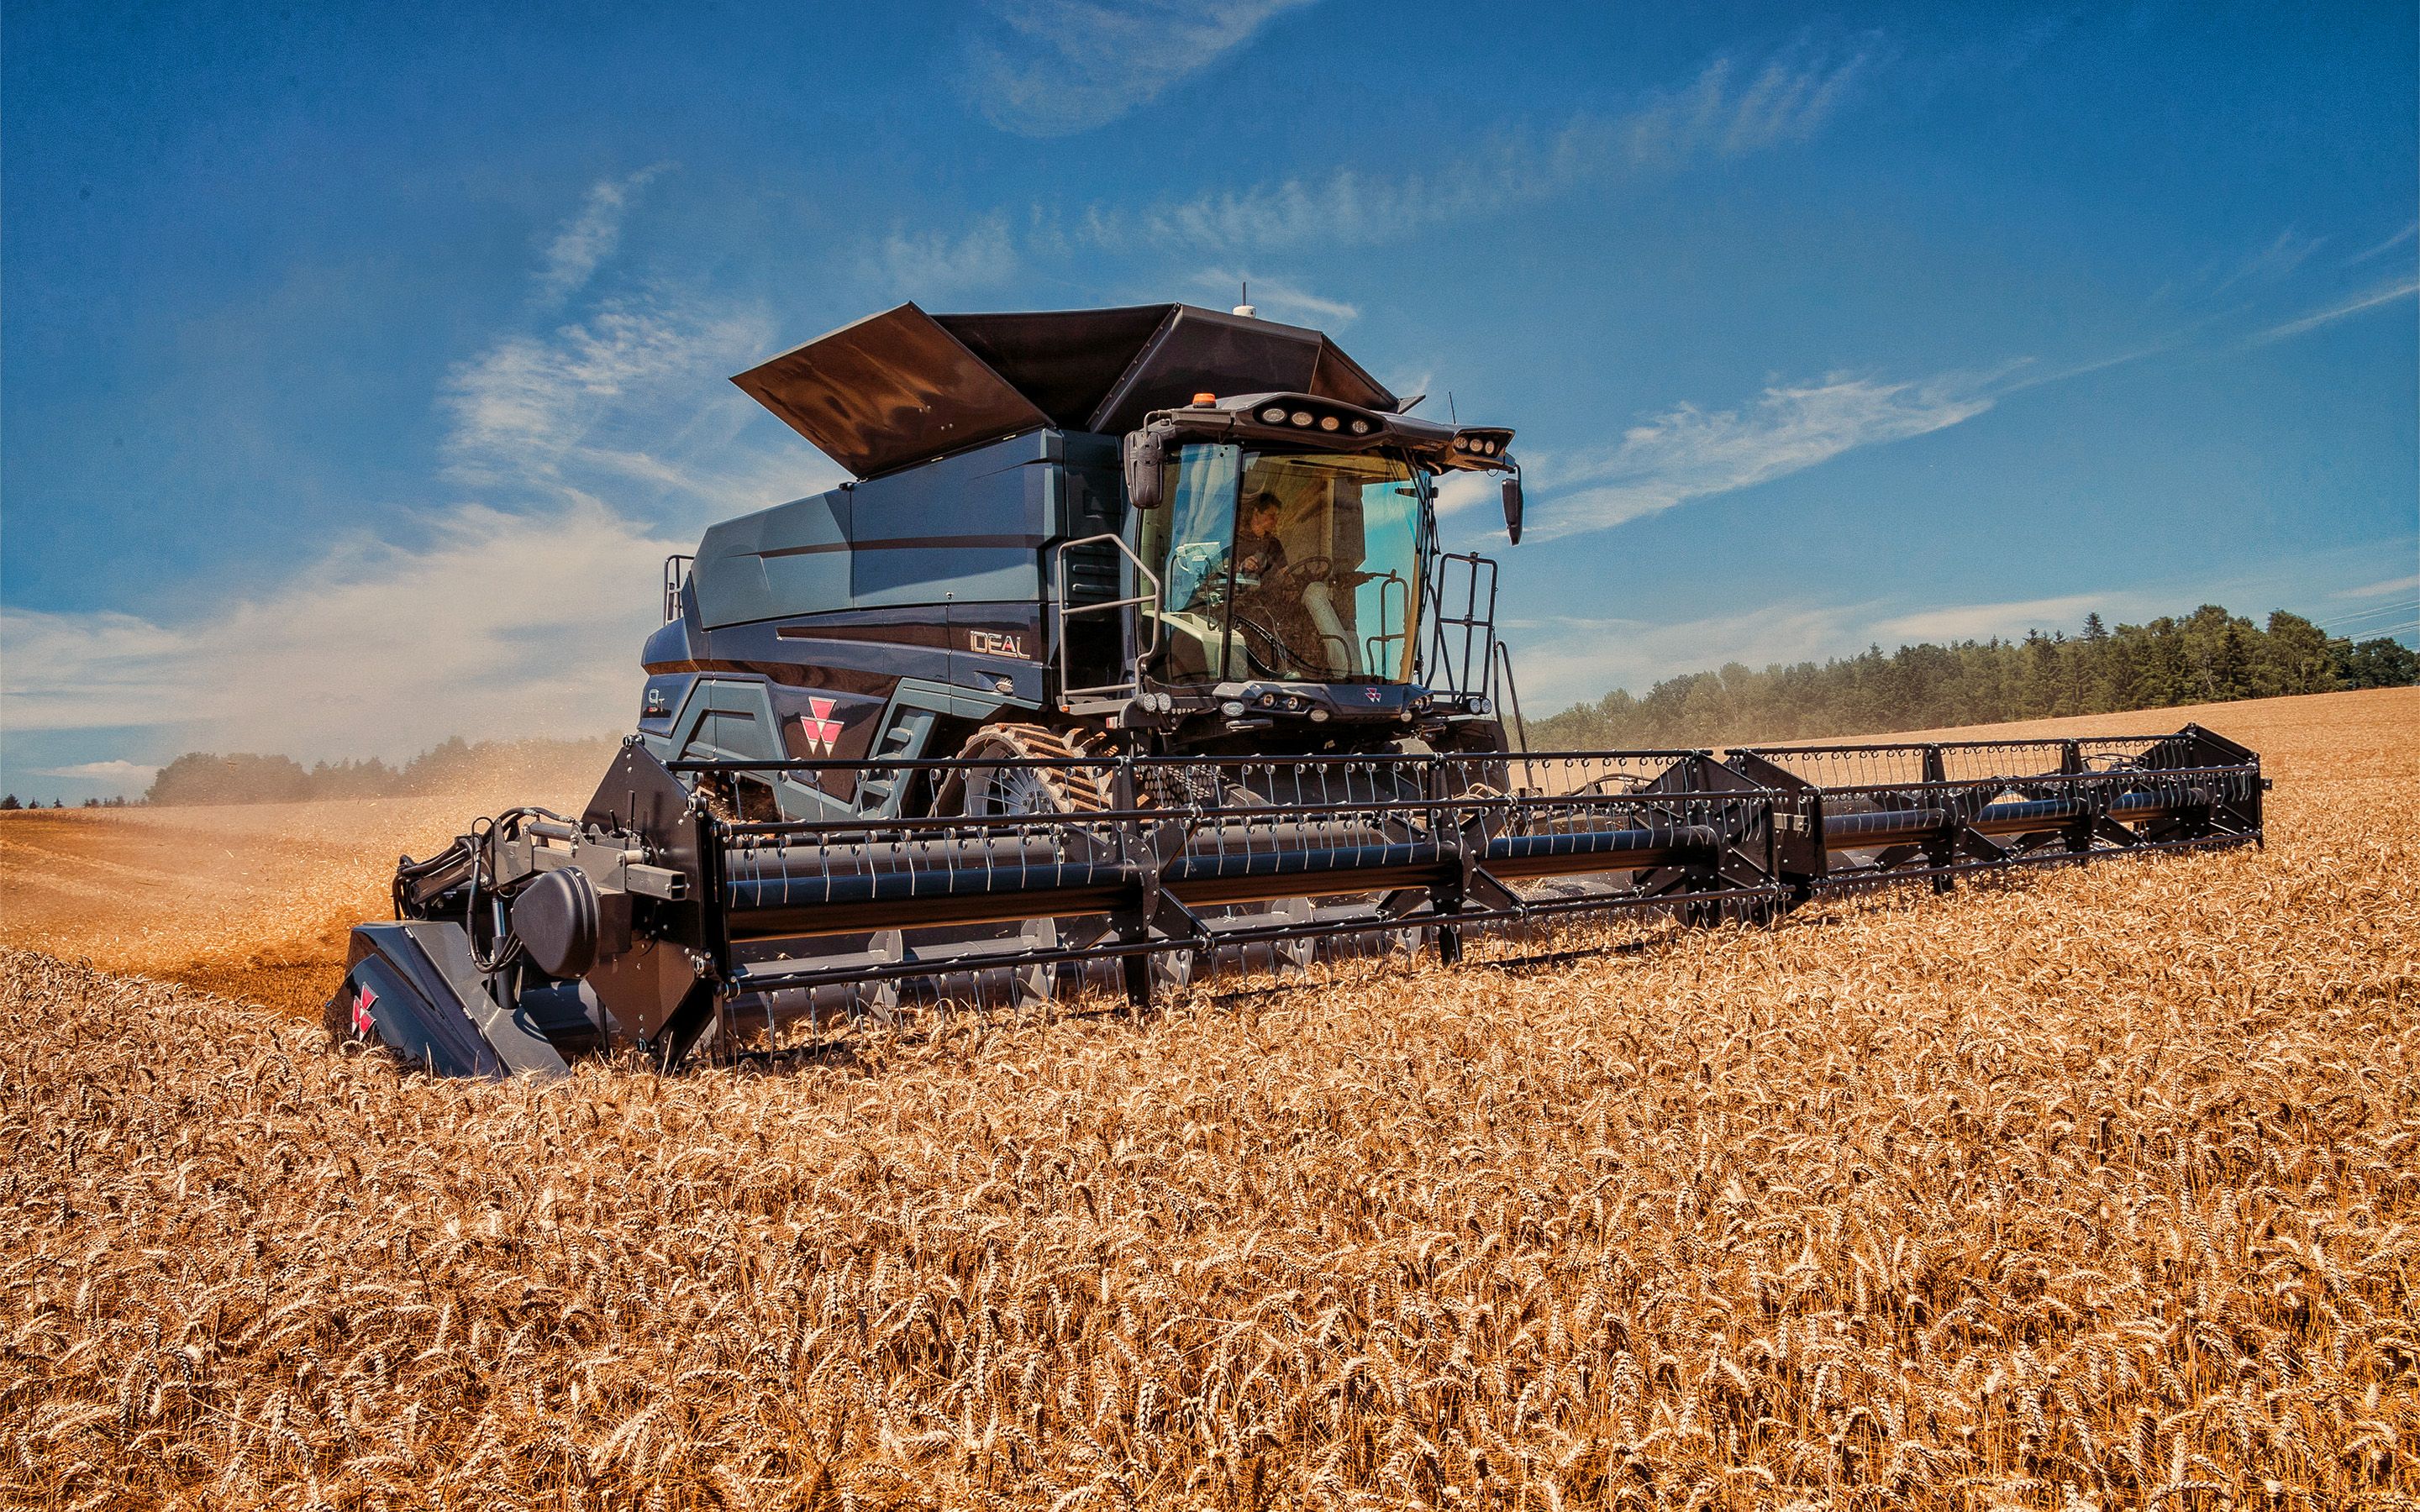 Download Wallpaper Massey Ferguson Ideal 9T, Wheat Harvesting, 2019 Combines, Combine, Black Combine, Combine Harvester, Agricultural Machinery, Massey Ferguson For Desktop With Resolution 2880x1800. High Quality HD Picture Wallpaper